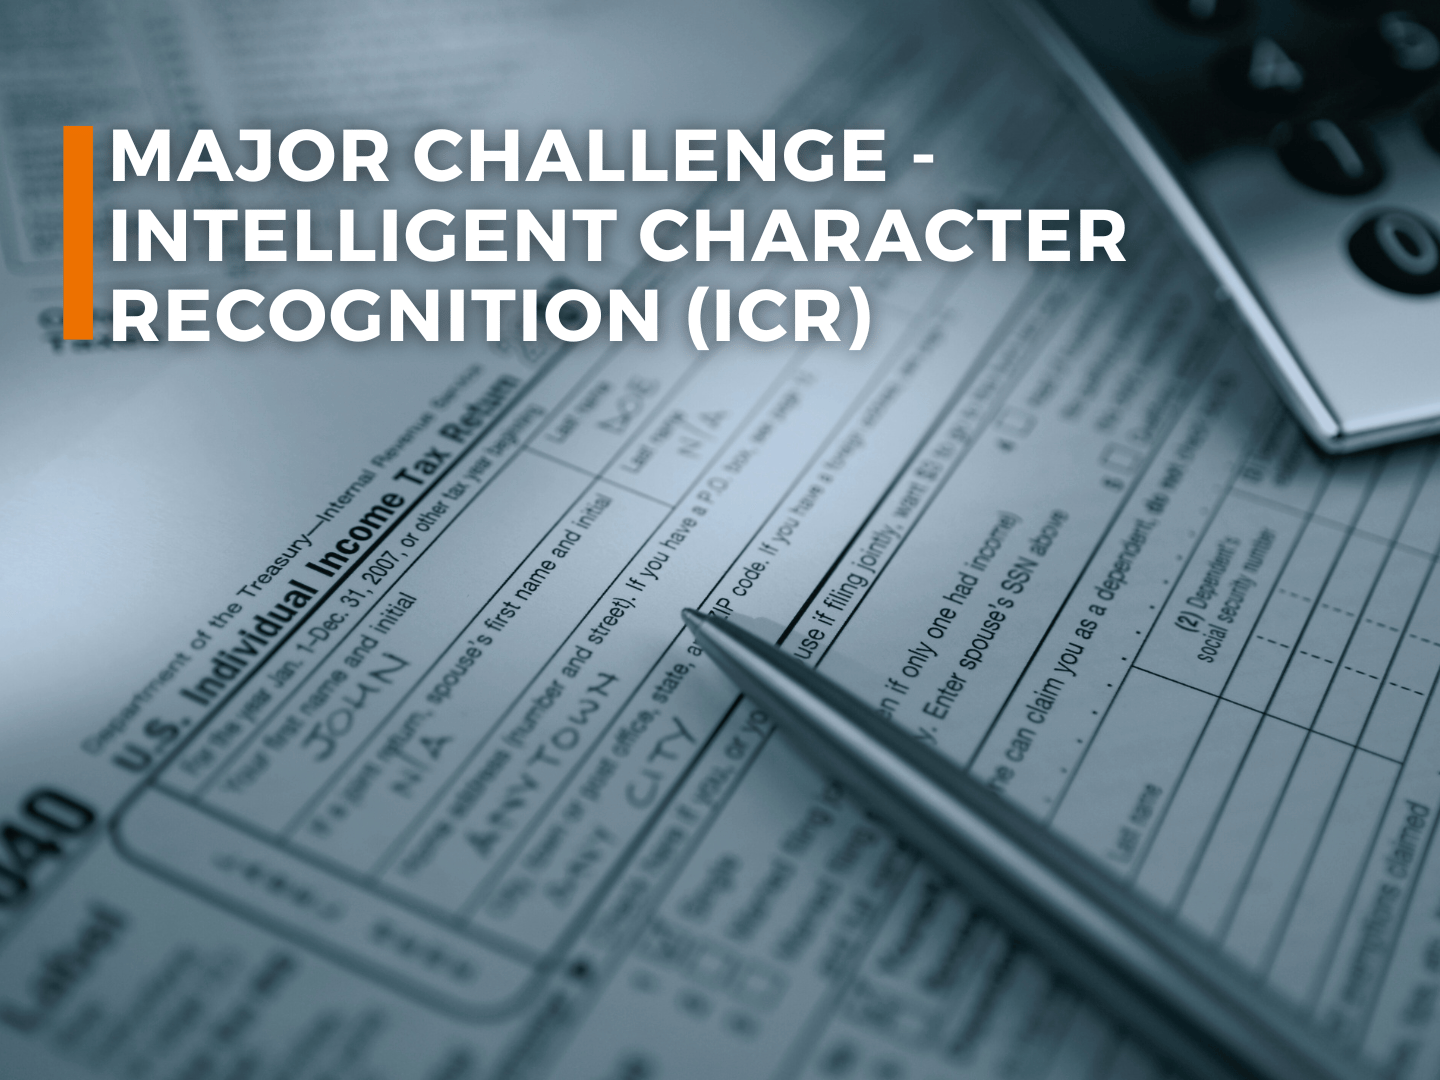 Major Challenge - Intelligent Character Recognition (ICR)